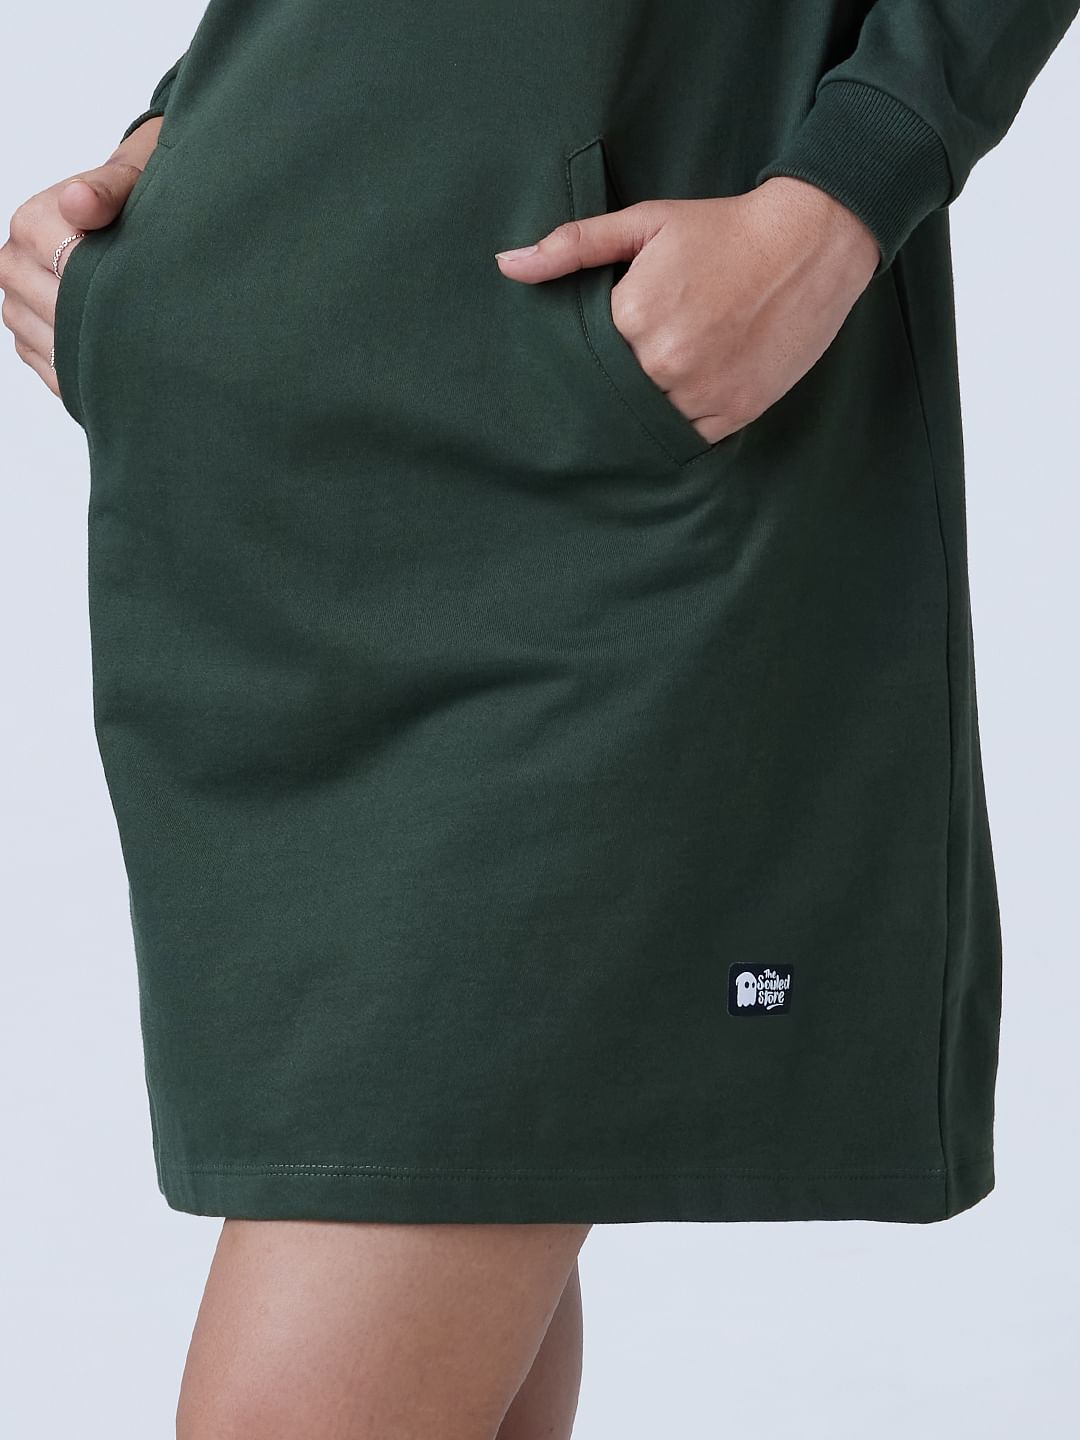 Solids Hoodie Dress: Olive Green